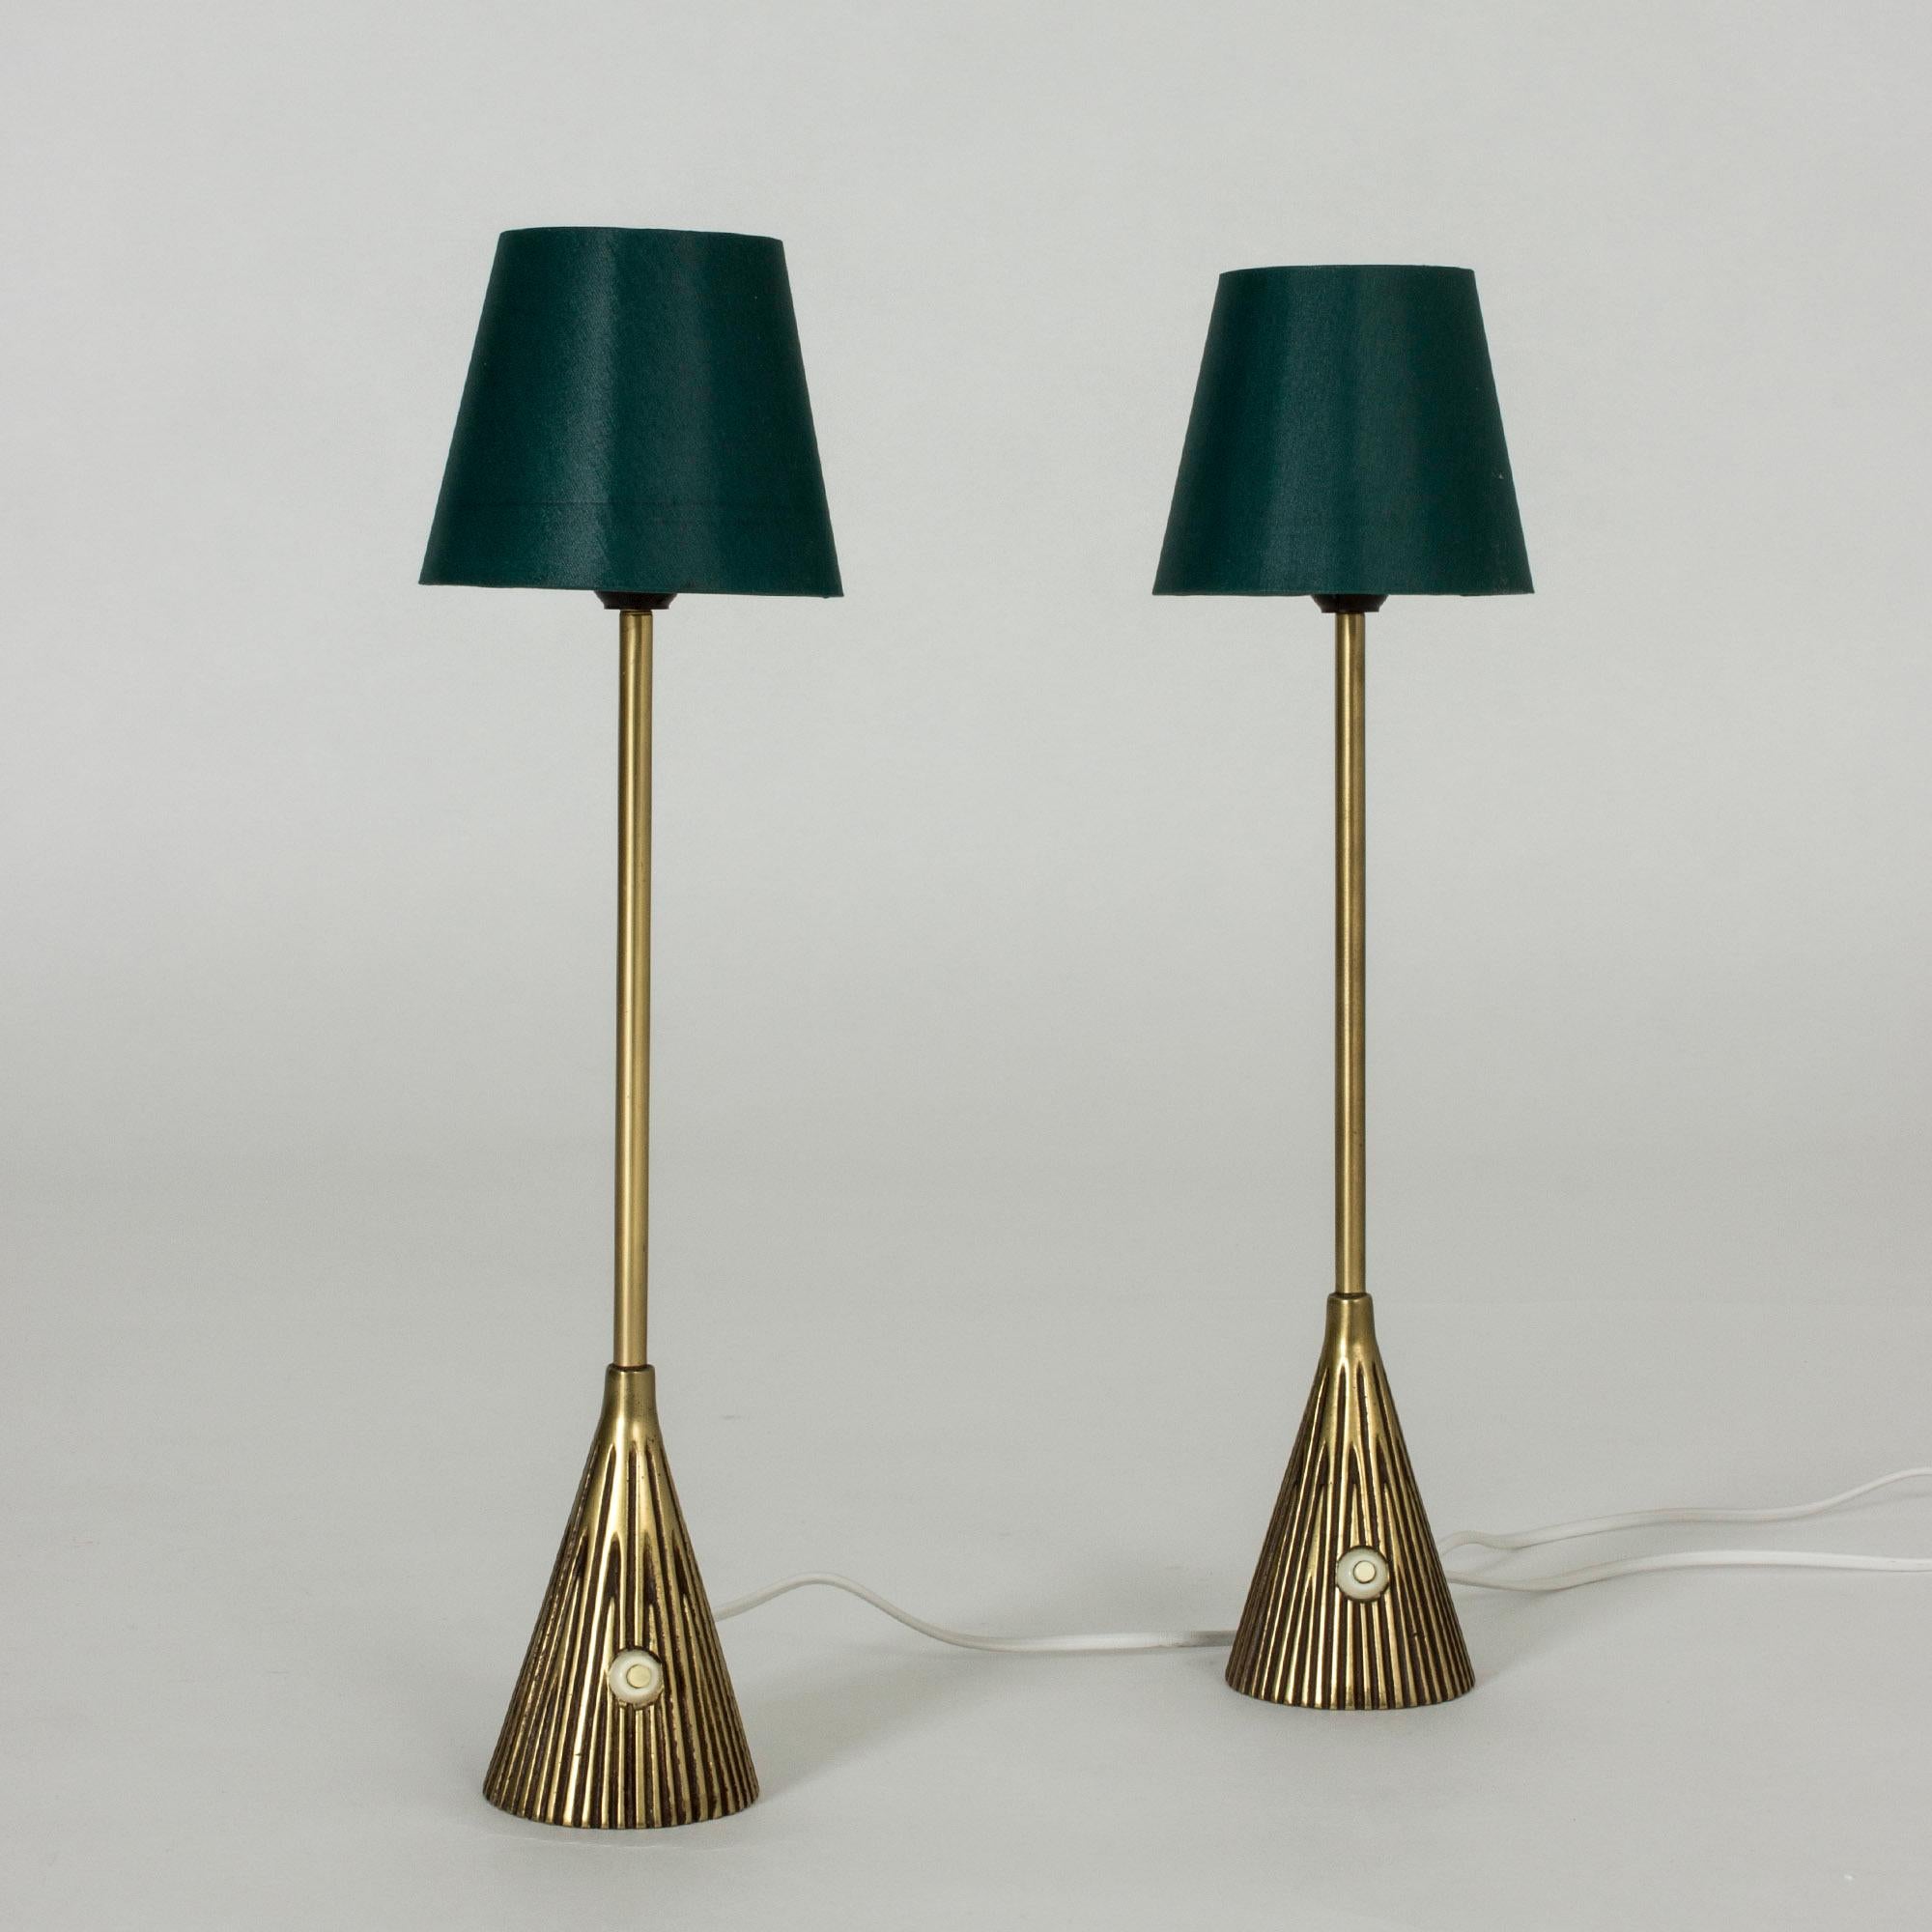 Pair of cool brass table lamps by Sonja Katzin. Slender design with conical bases with a relief pattern of stripes that gives an impression of movement.